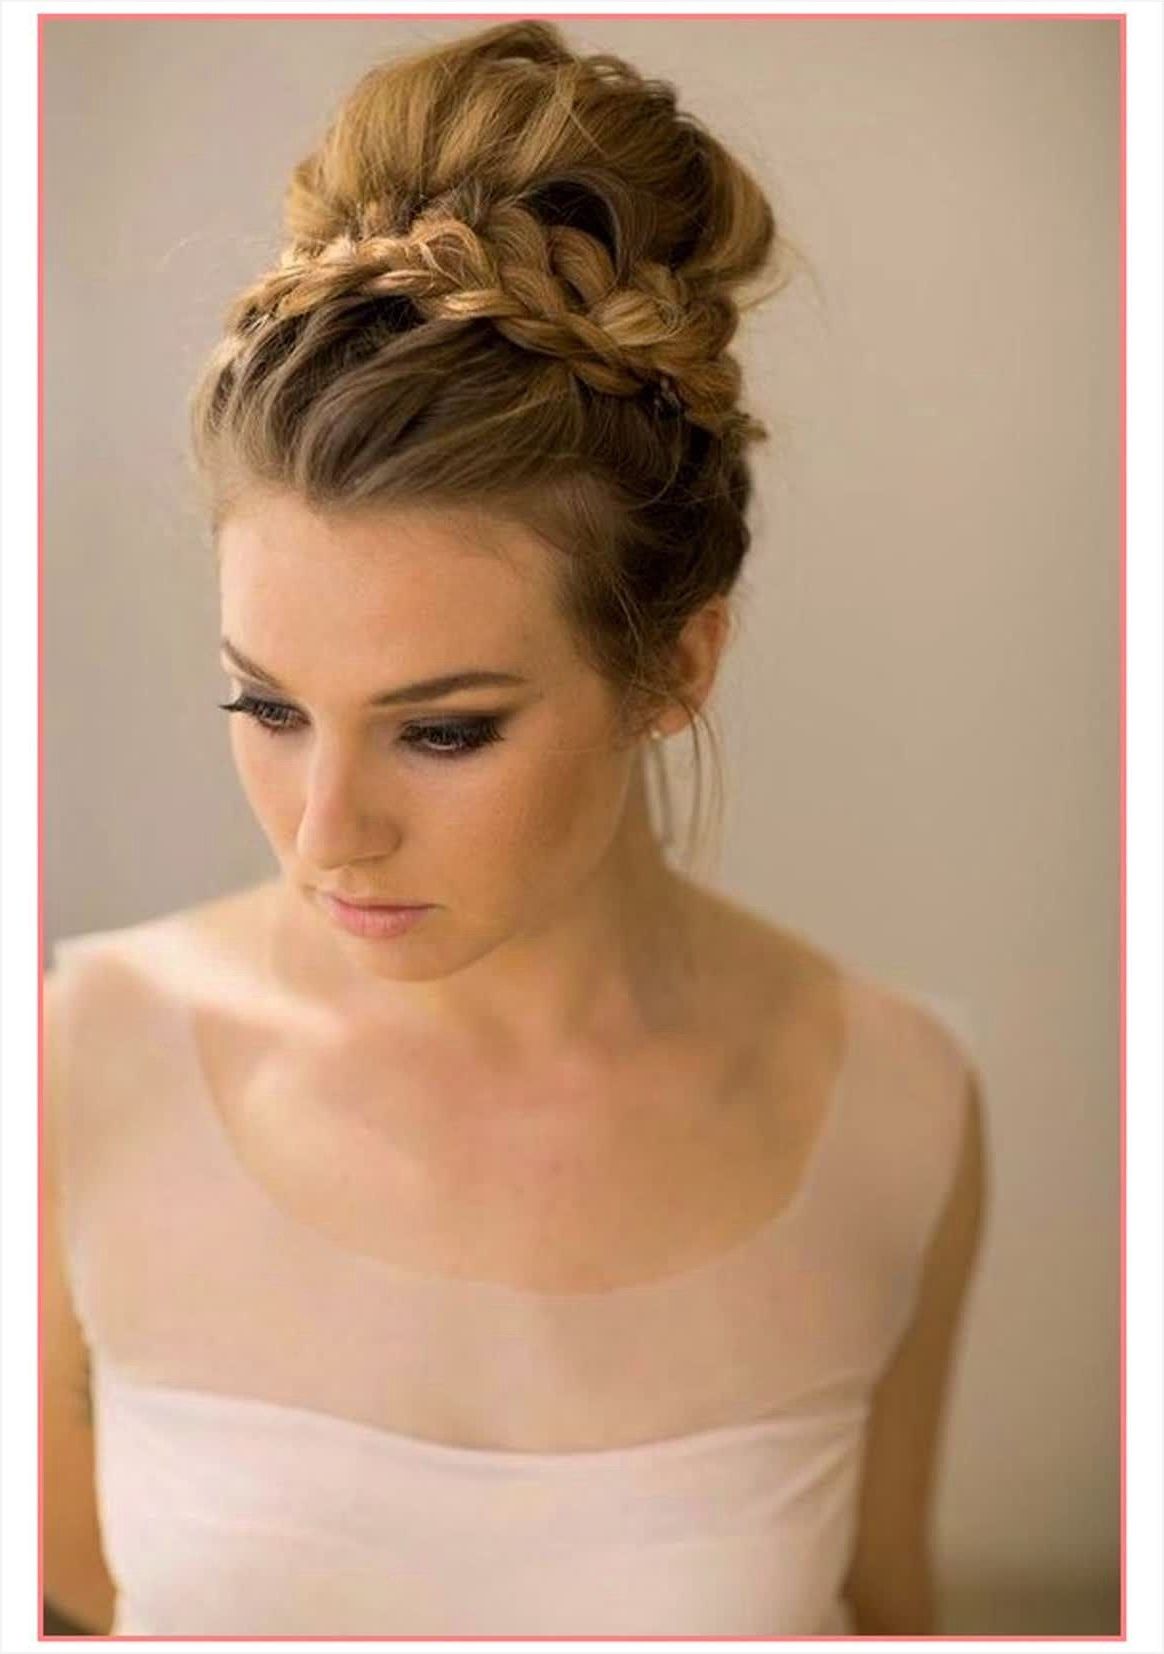 41 Cute Hairstyles For Wedding Guests | Hair | Pinterest | Wedding Regarding Hairstyles For Short Hair For Wedding Guest (Photo 13 of 25)